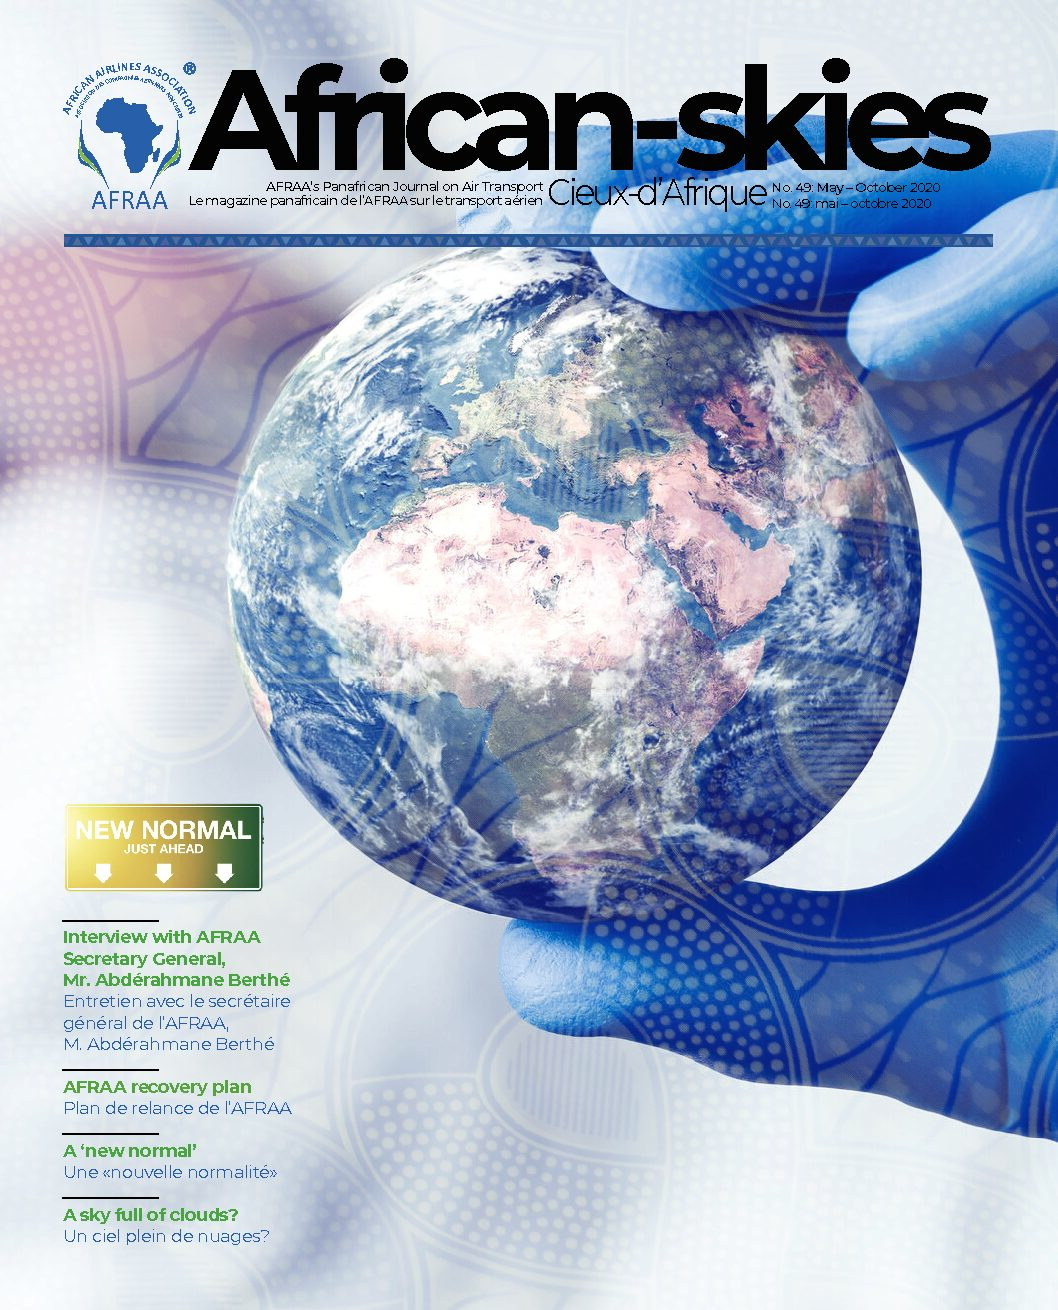 African Skies Issue no. 49